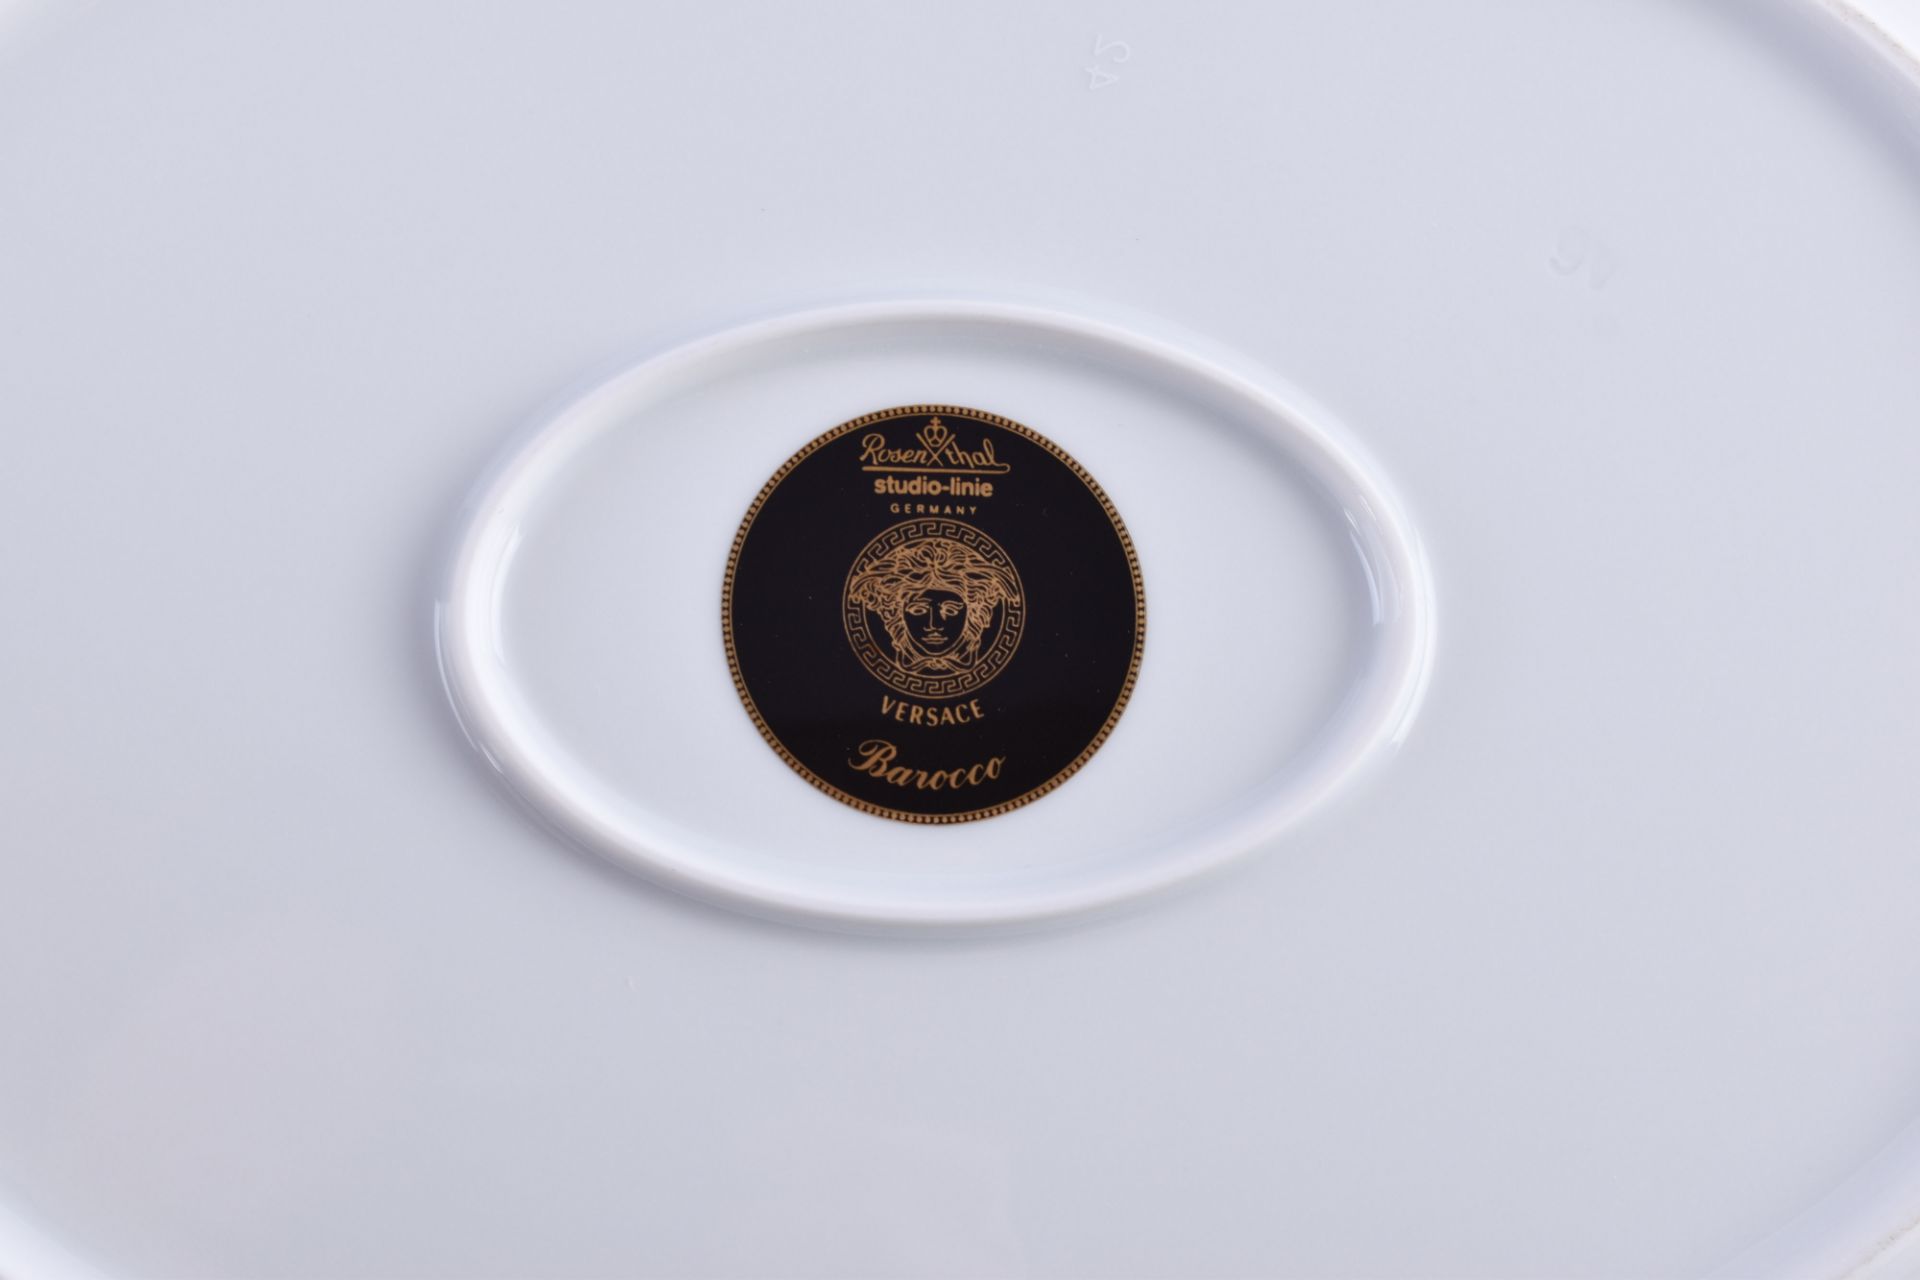 Offering plate Rosenthal Versace Barocco  - Image 3 of 3